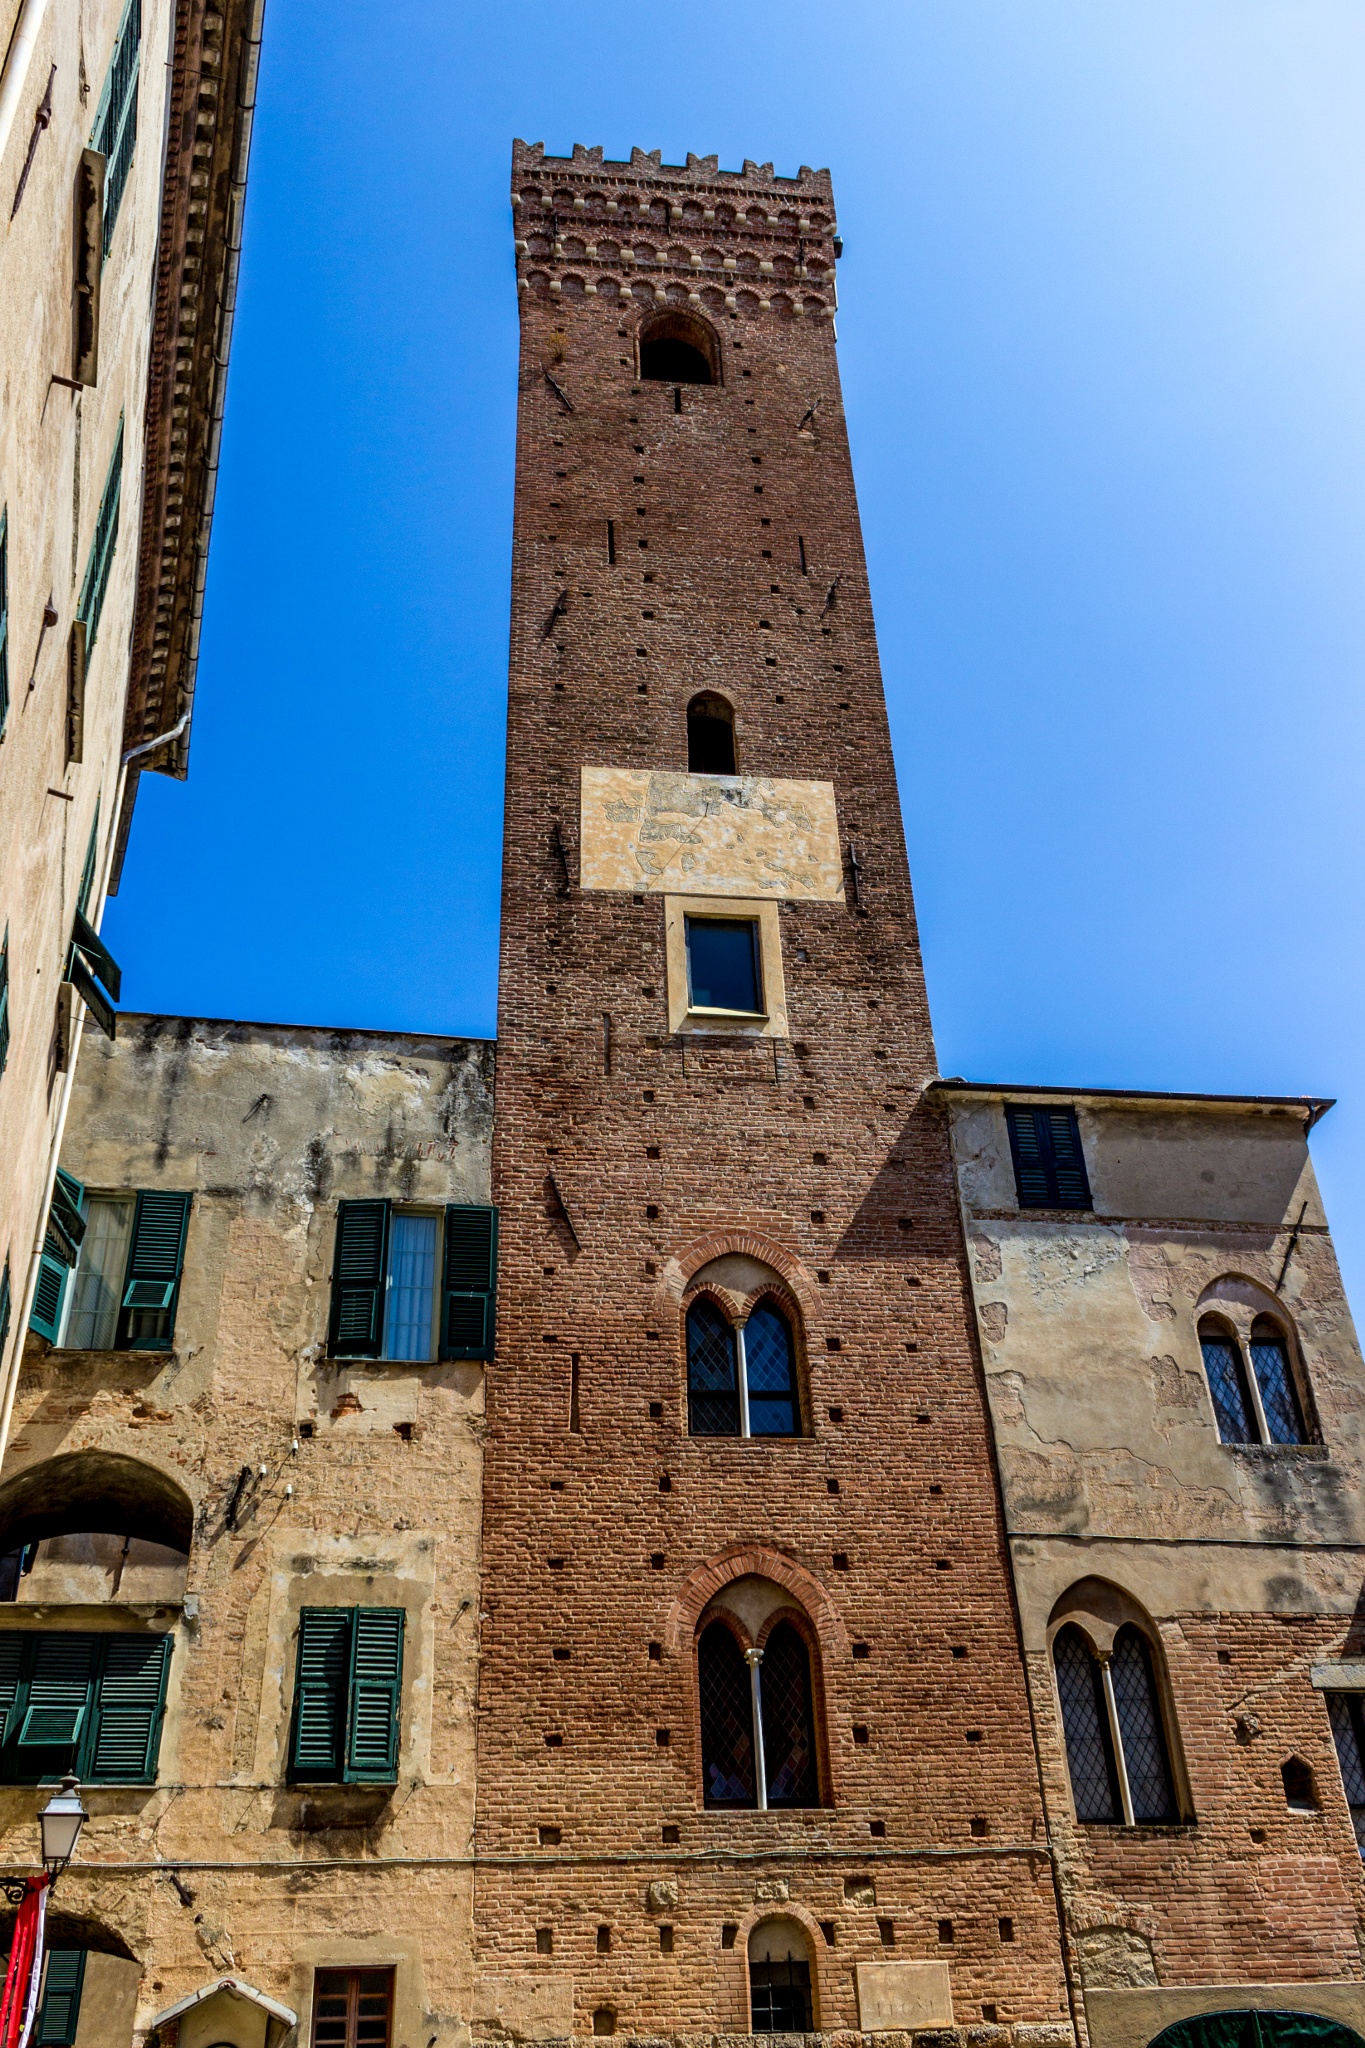 Tower in Albenga by Francesco Fugazzi on 500px | Photography ...